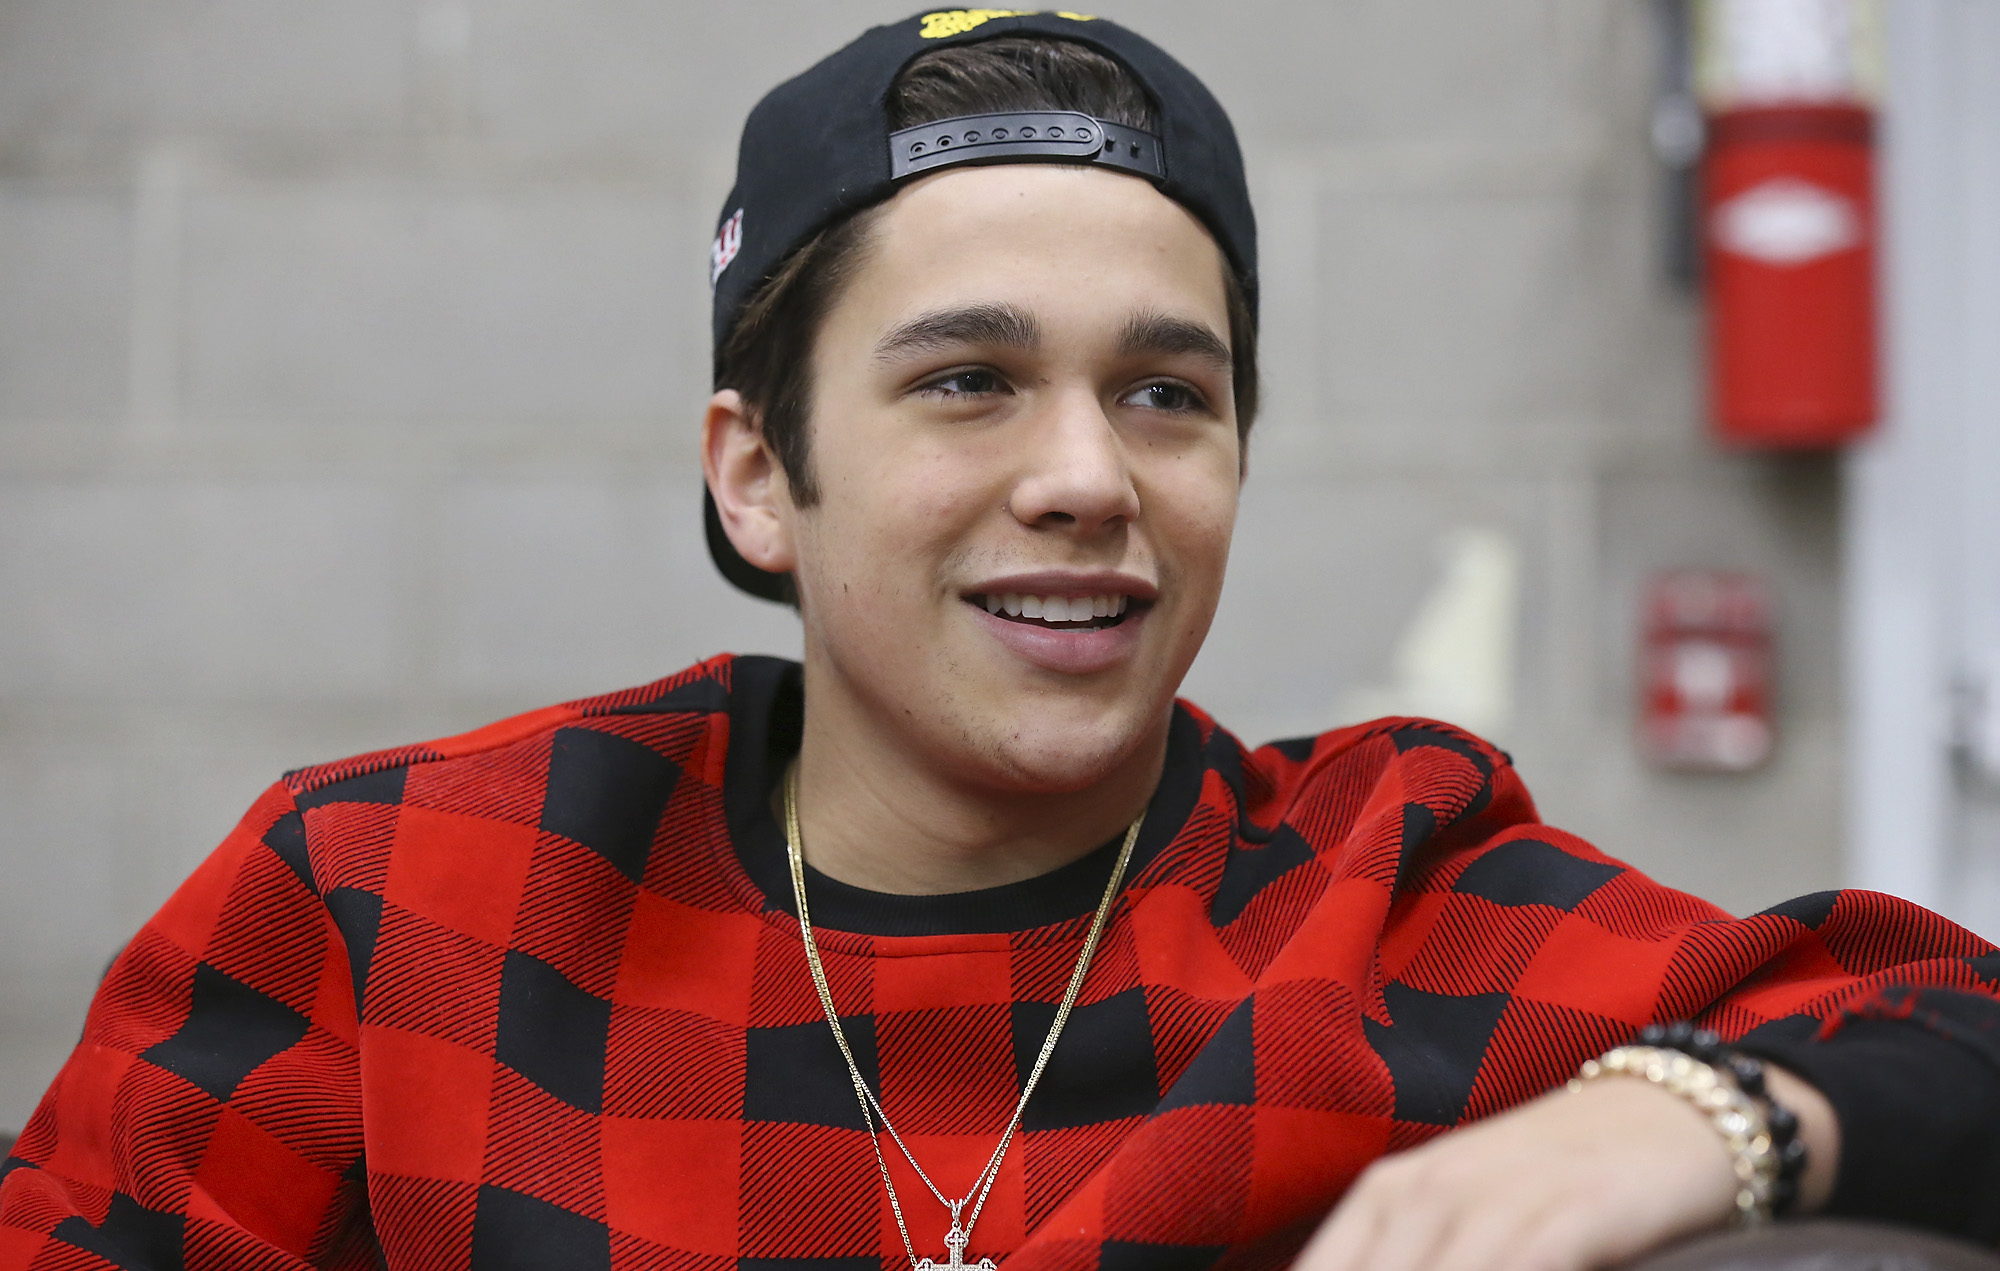 Austin Mahone book signing sells out.